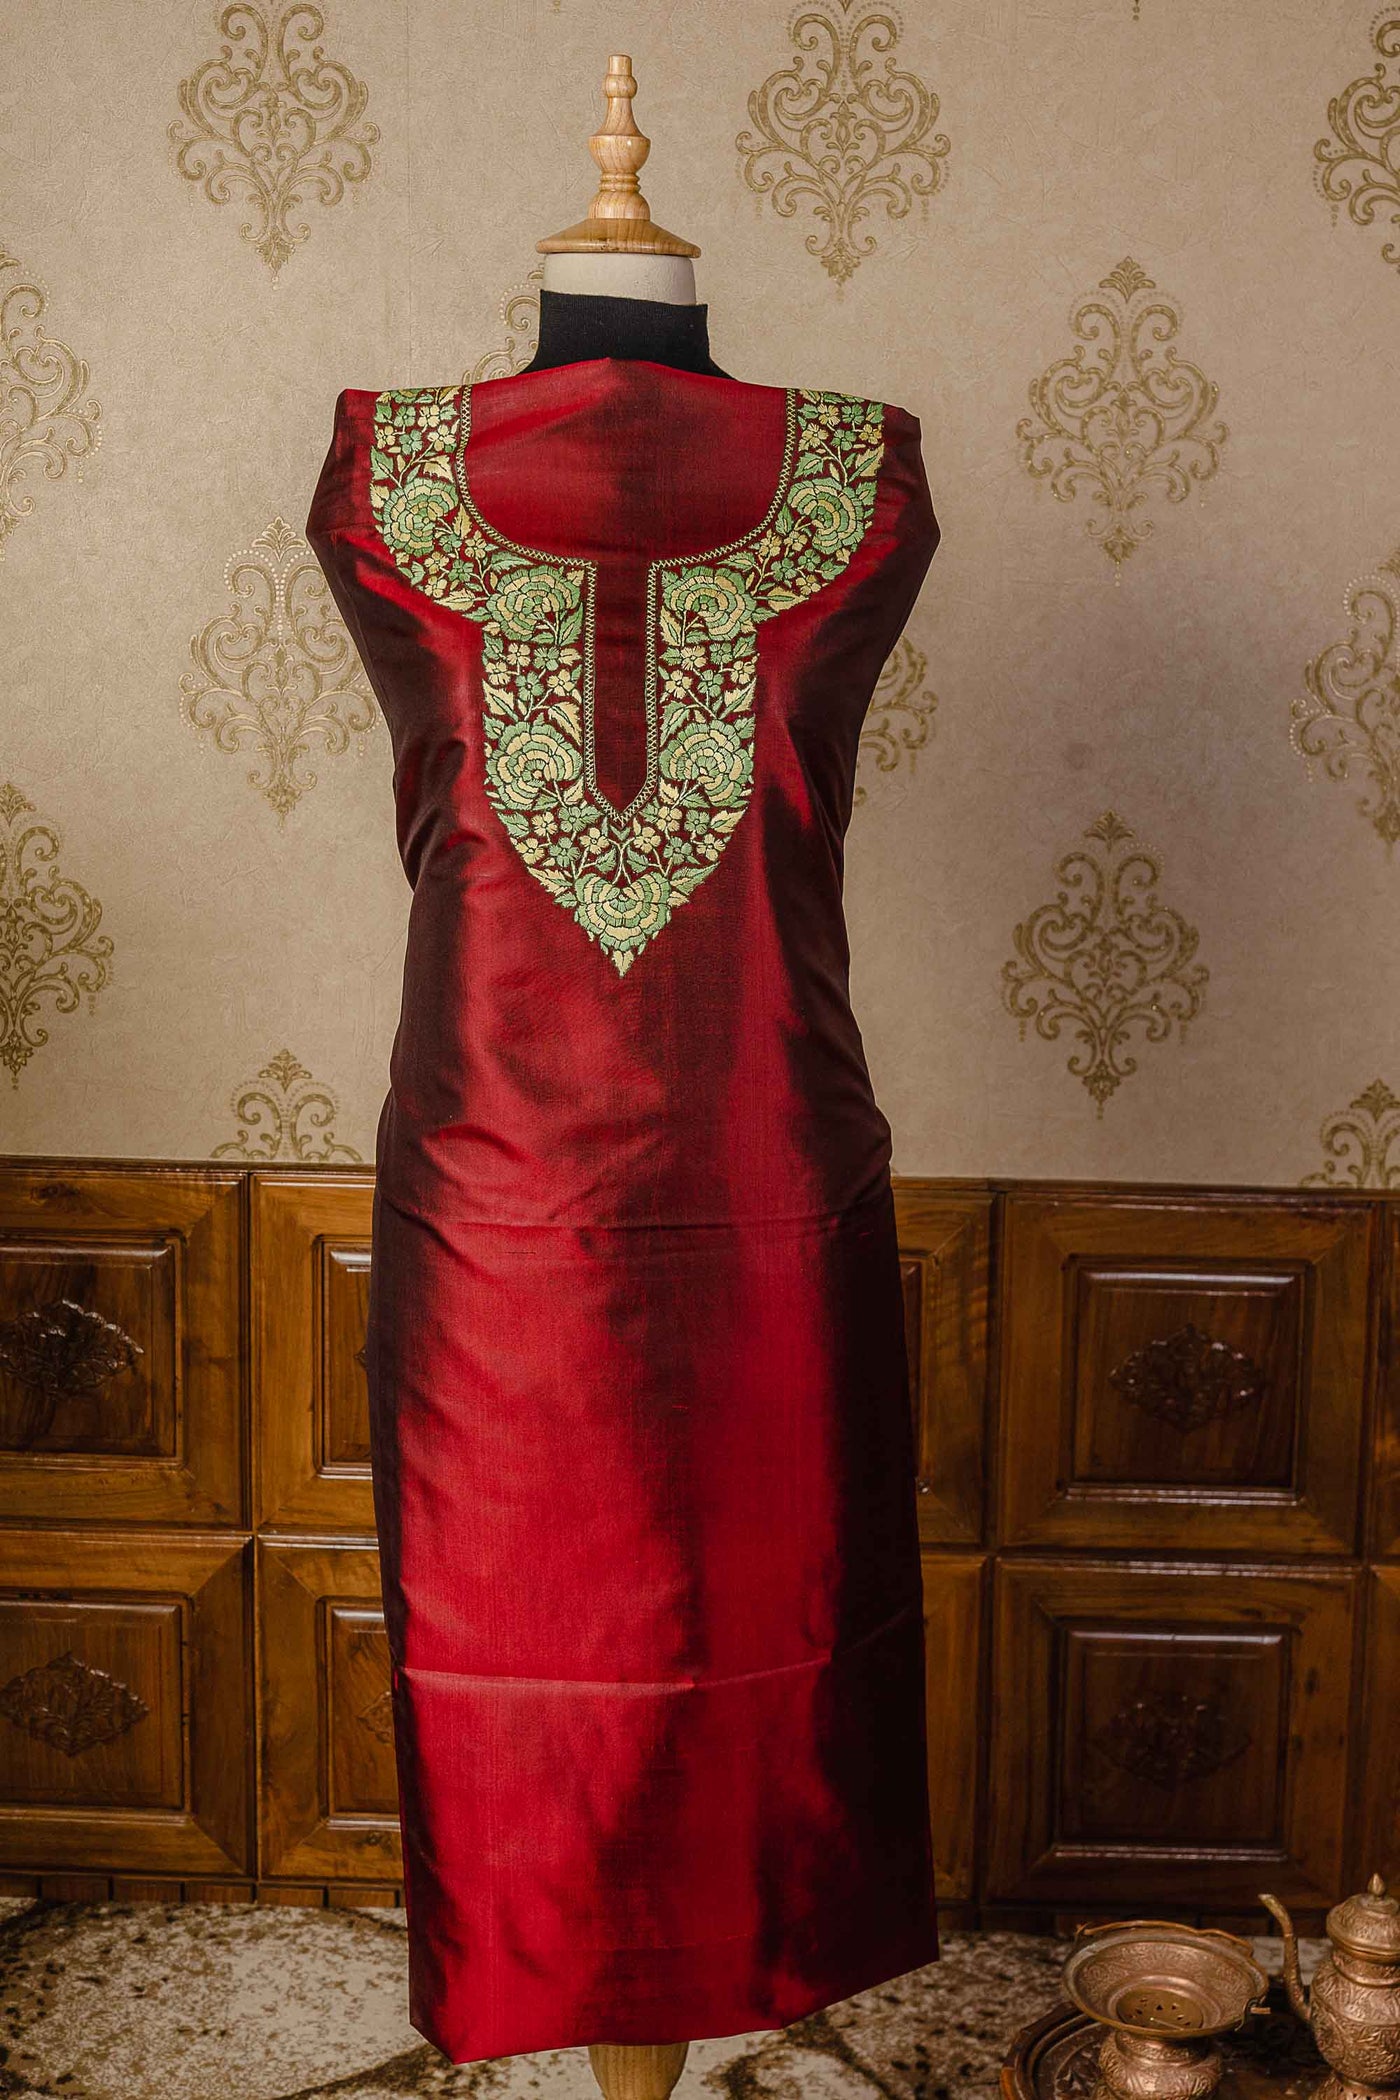 Exquisite Maroon Kashmiri Suit - Handcrafted Elegance in Pure Silk with Paper Mache Embroidery - KashmKari